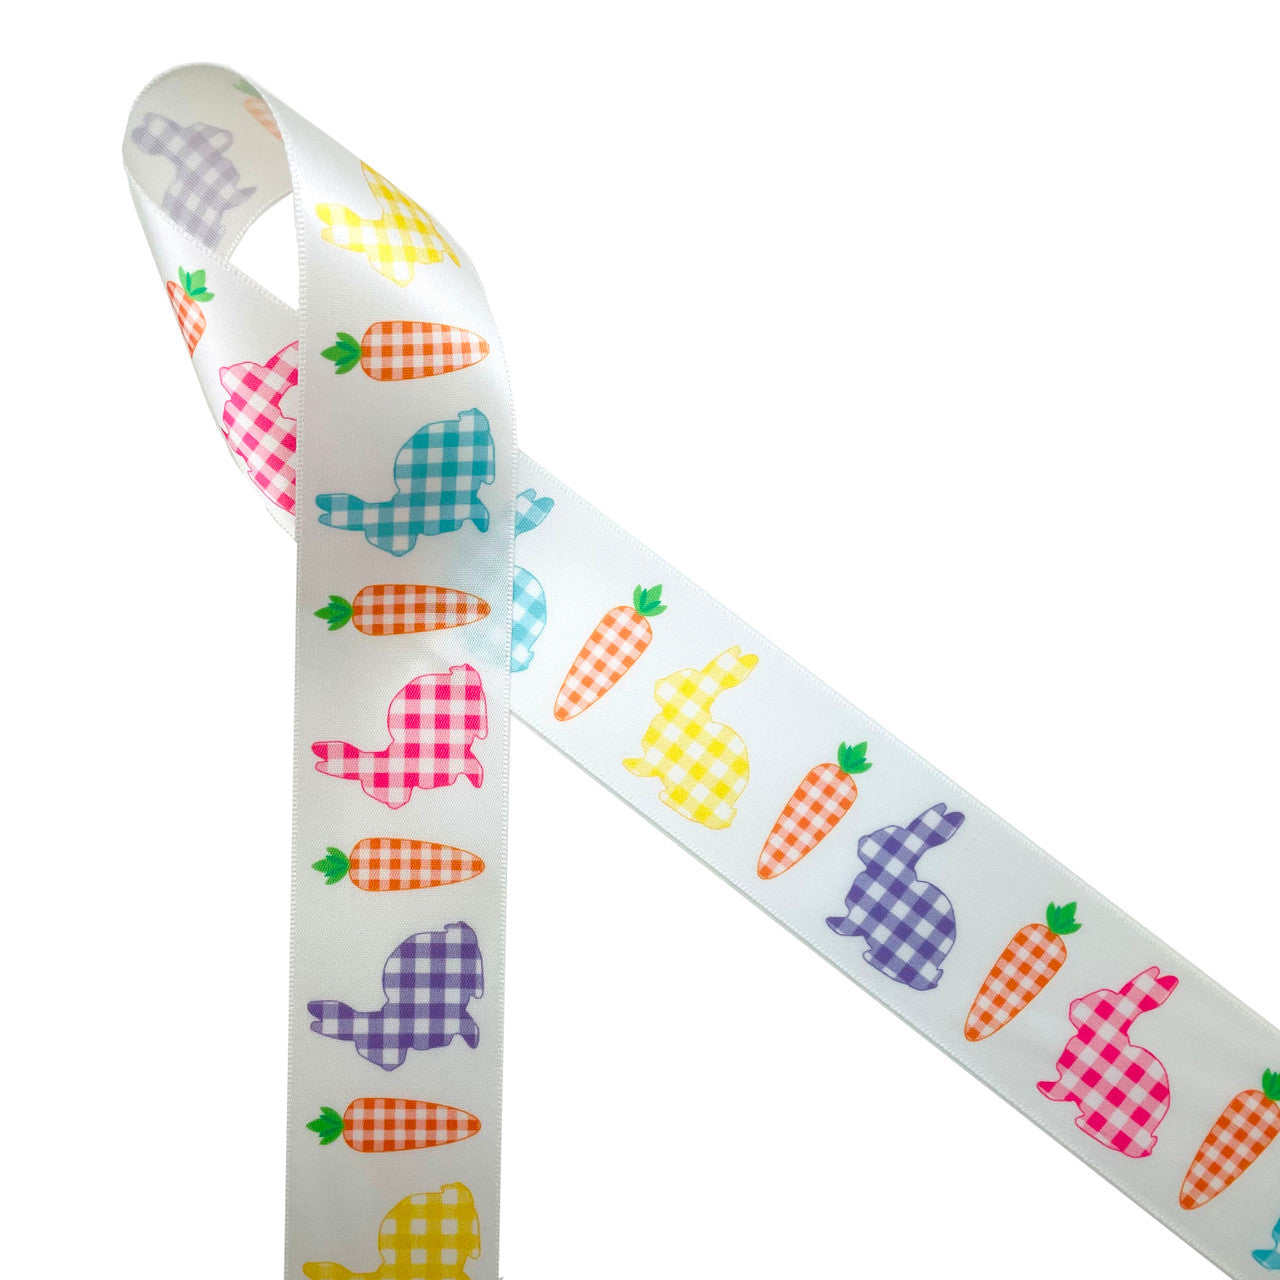 Gingham bunnies in pink, blue, purple and yellow with orange gingham carrots line up on 1.5" white single face satin creating a fun Easter ribbon for Easter baskets, Easter decor, gift wrap, wreaths, Spring decor, quilting, sewing and Spring crafting. All our ribbon is designed and printed in the USA